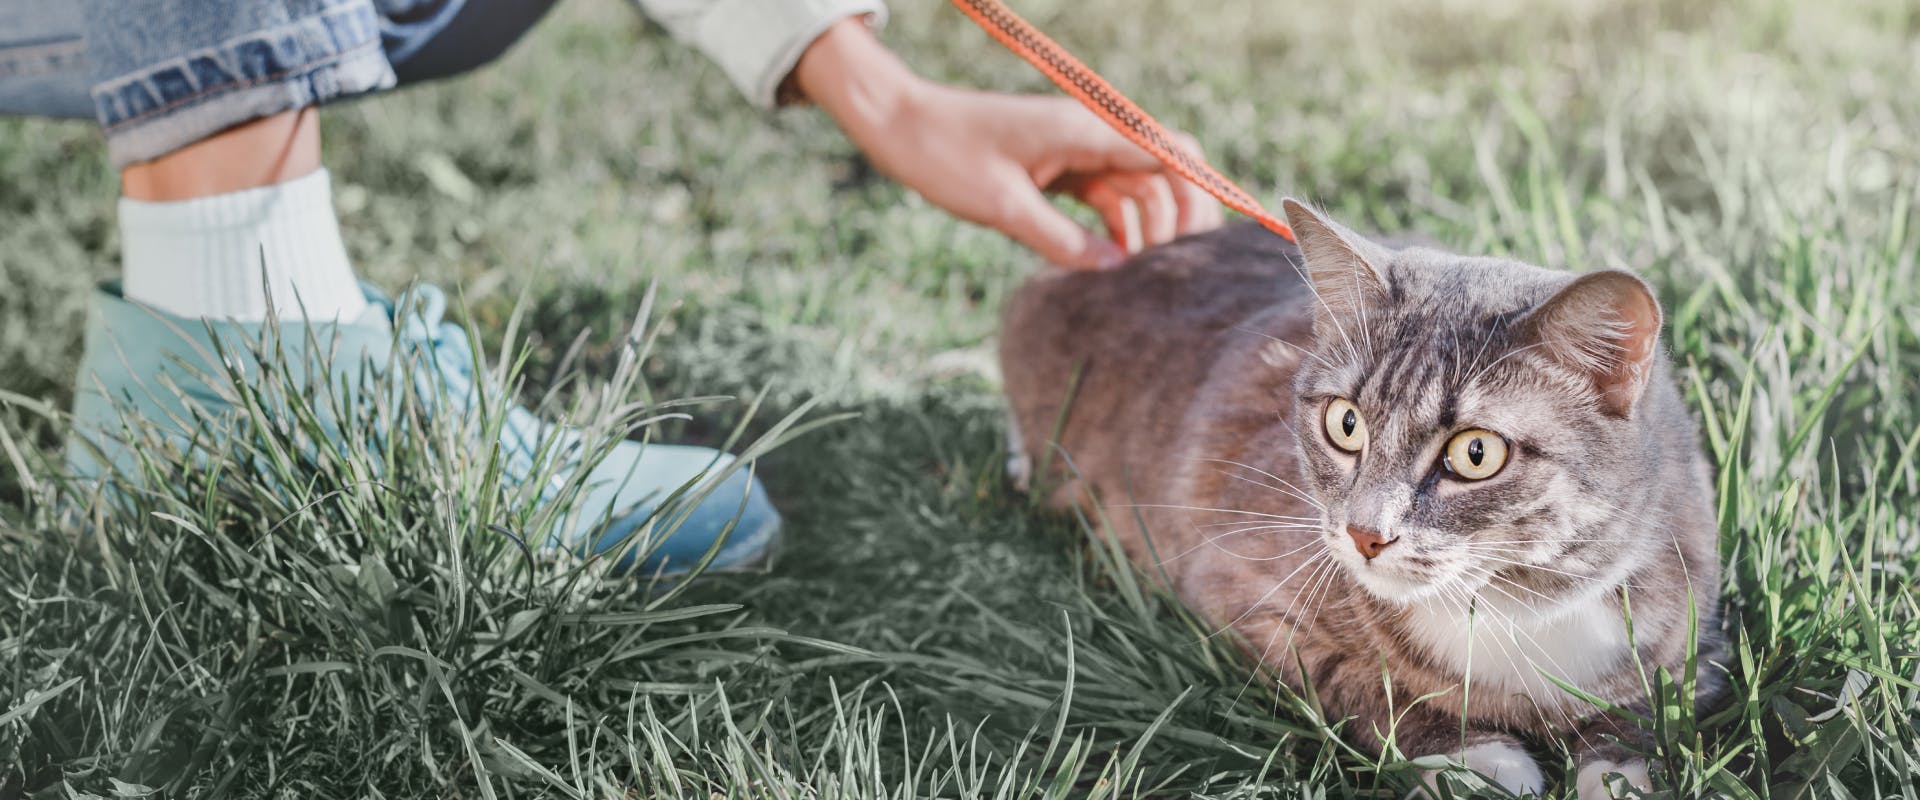 a gray and white cat sat on a patch of grass wearing an orange harness and lead